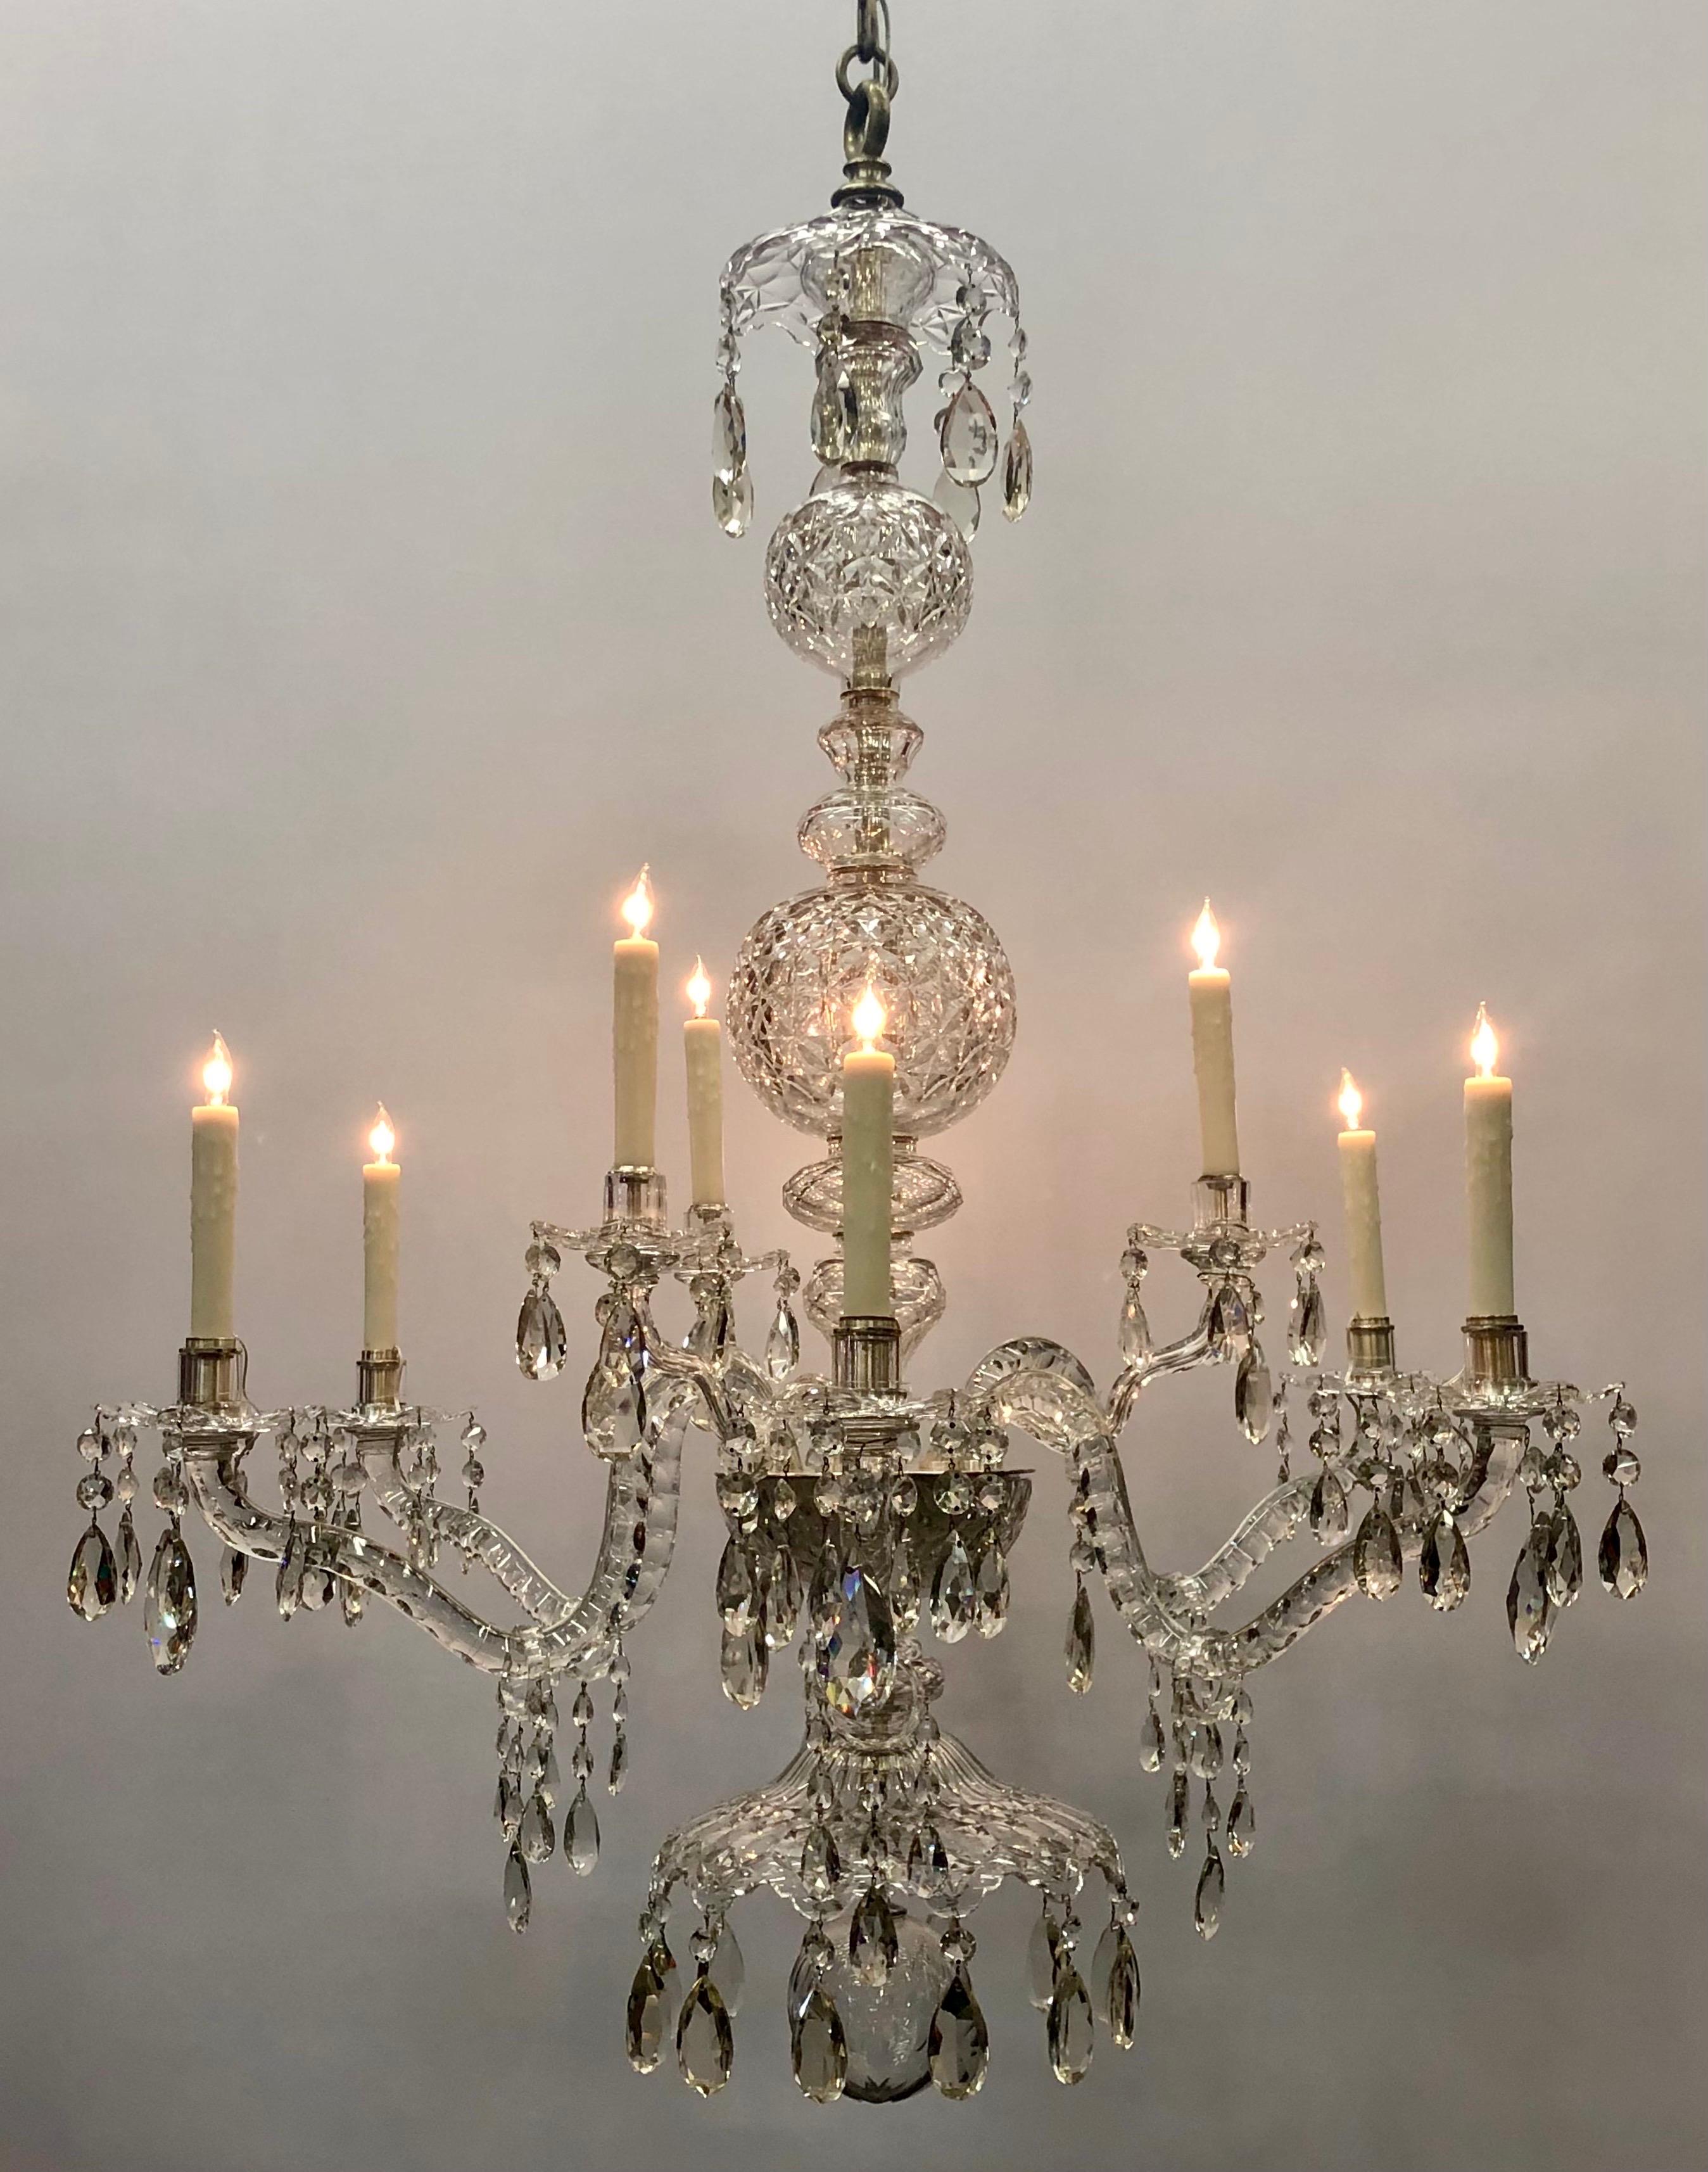 Monumental 19th Century Irish Crystal Georgian Nine Light Chandelier.   The Refined Anglo-Irish Chandelier has lead crystal stem-pieces comprised with shallow relief cut diamond nesting sections of shaped pieces and  two graduated relief cut